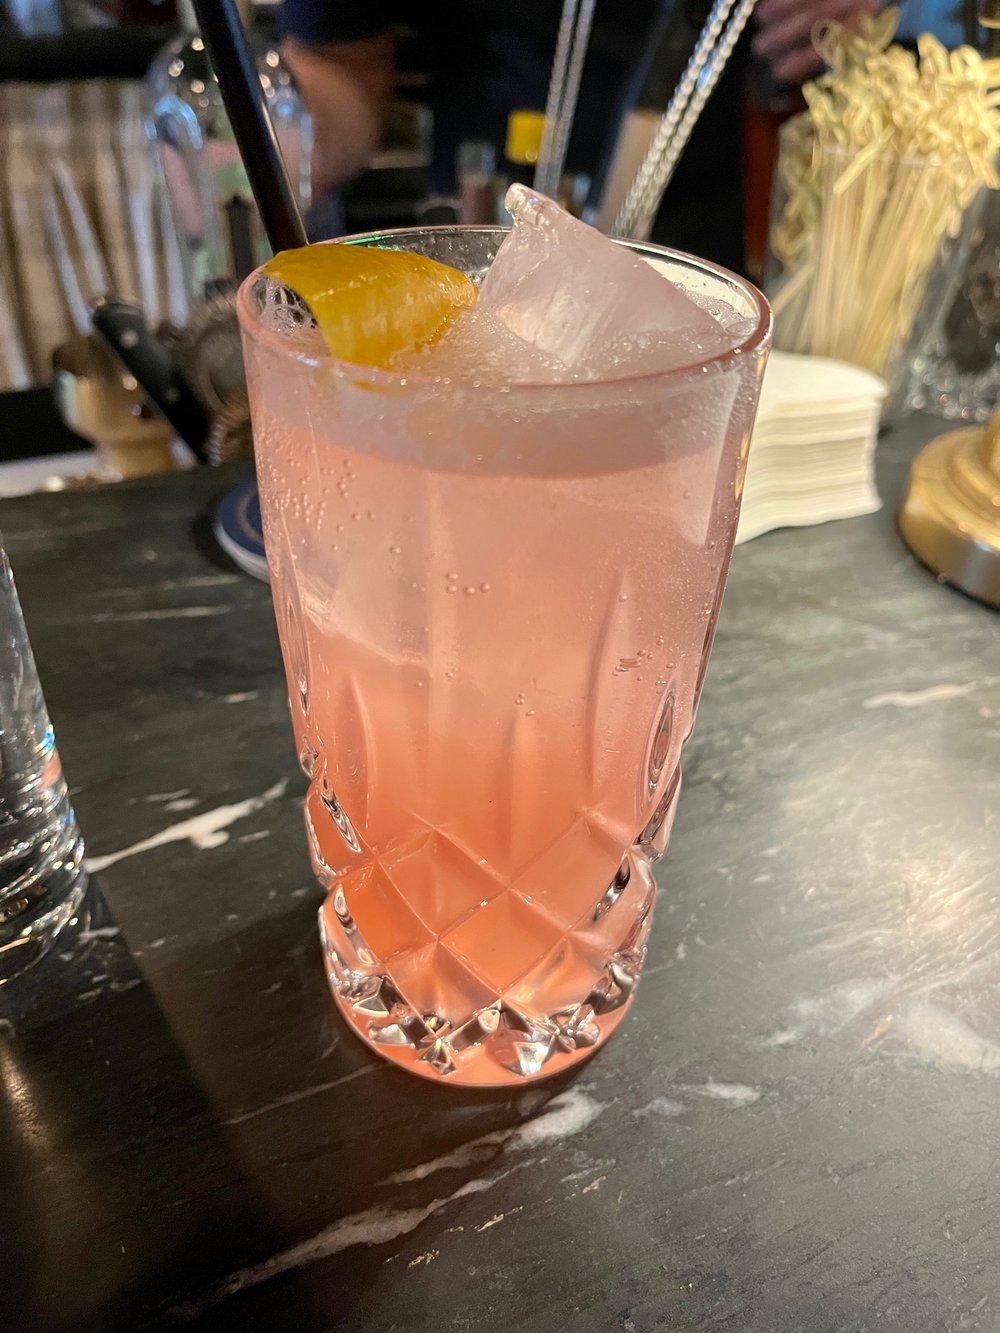  Greg crafted me a cocktail of strawberry sage shrub and rhubarb liqueur. Delicious! 